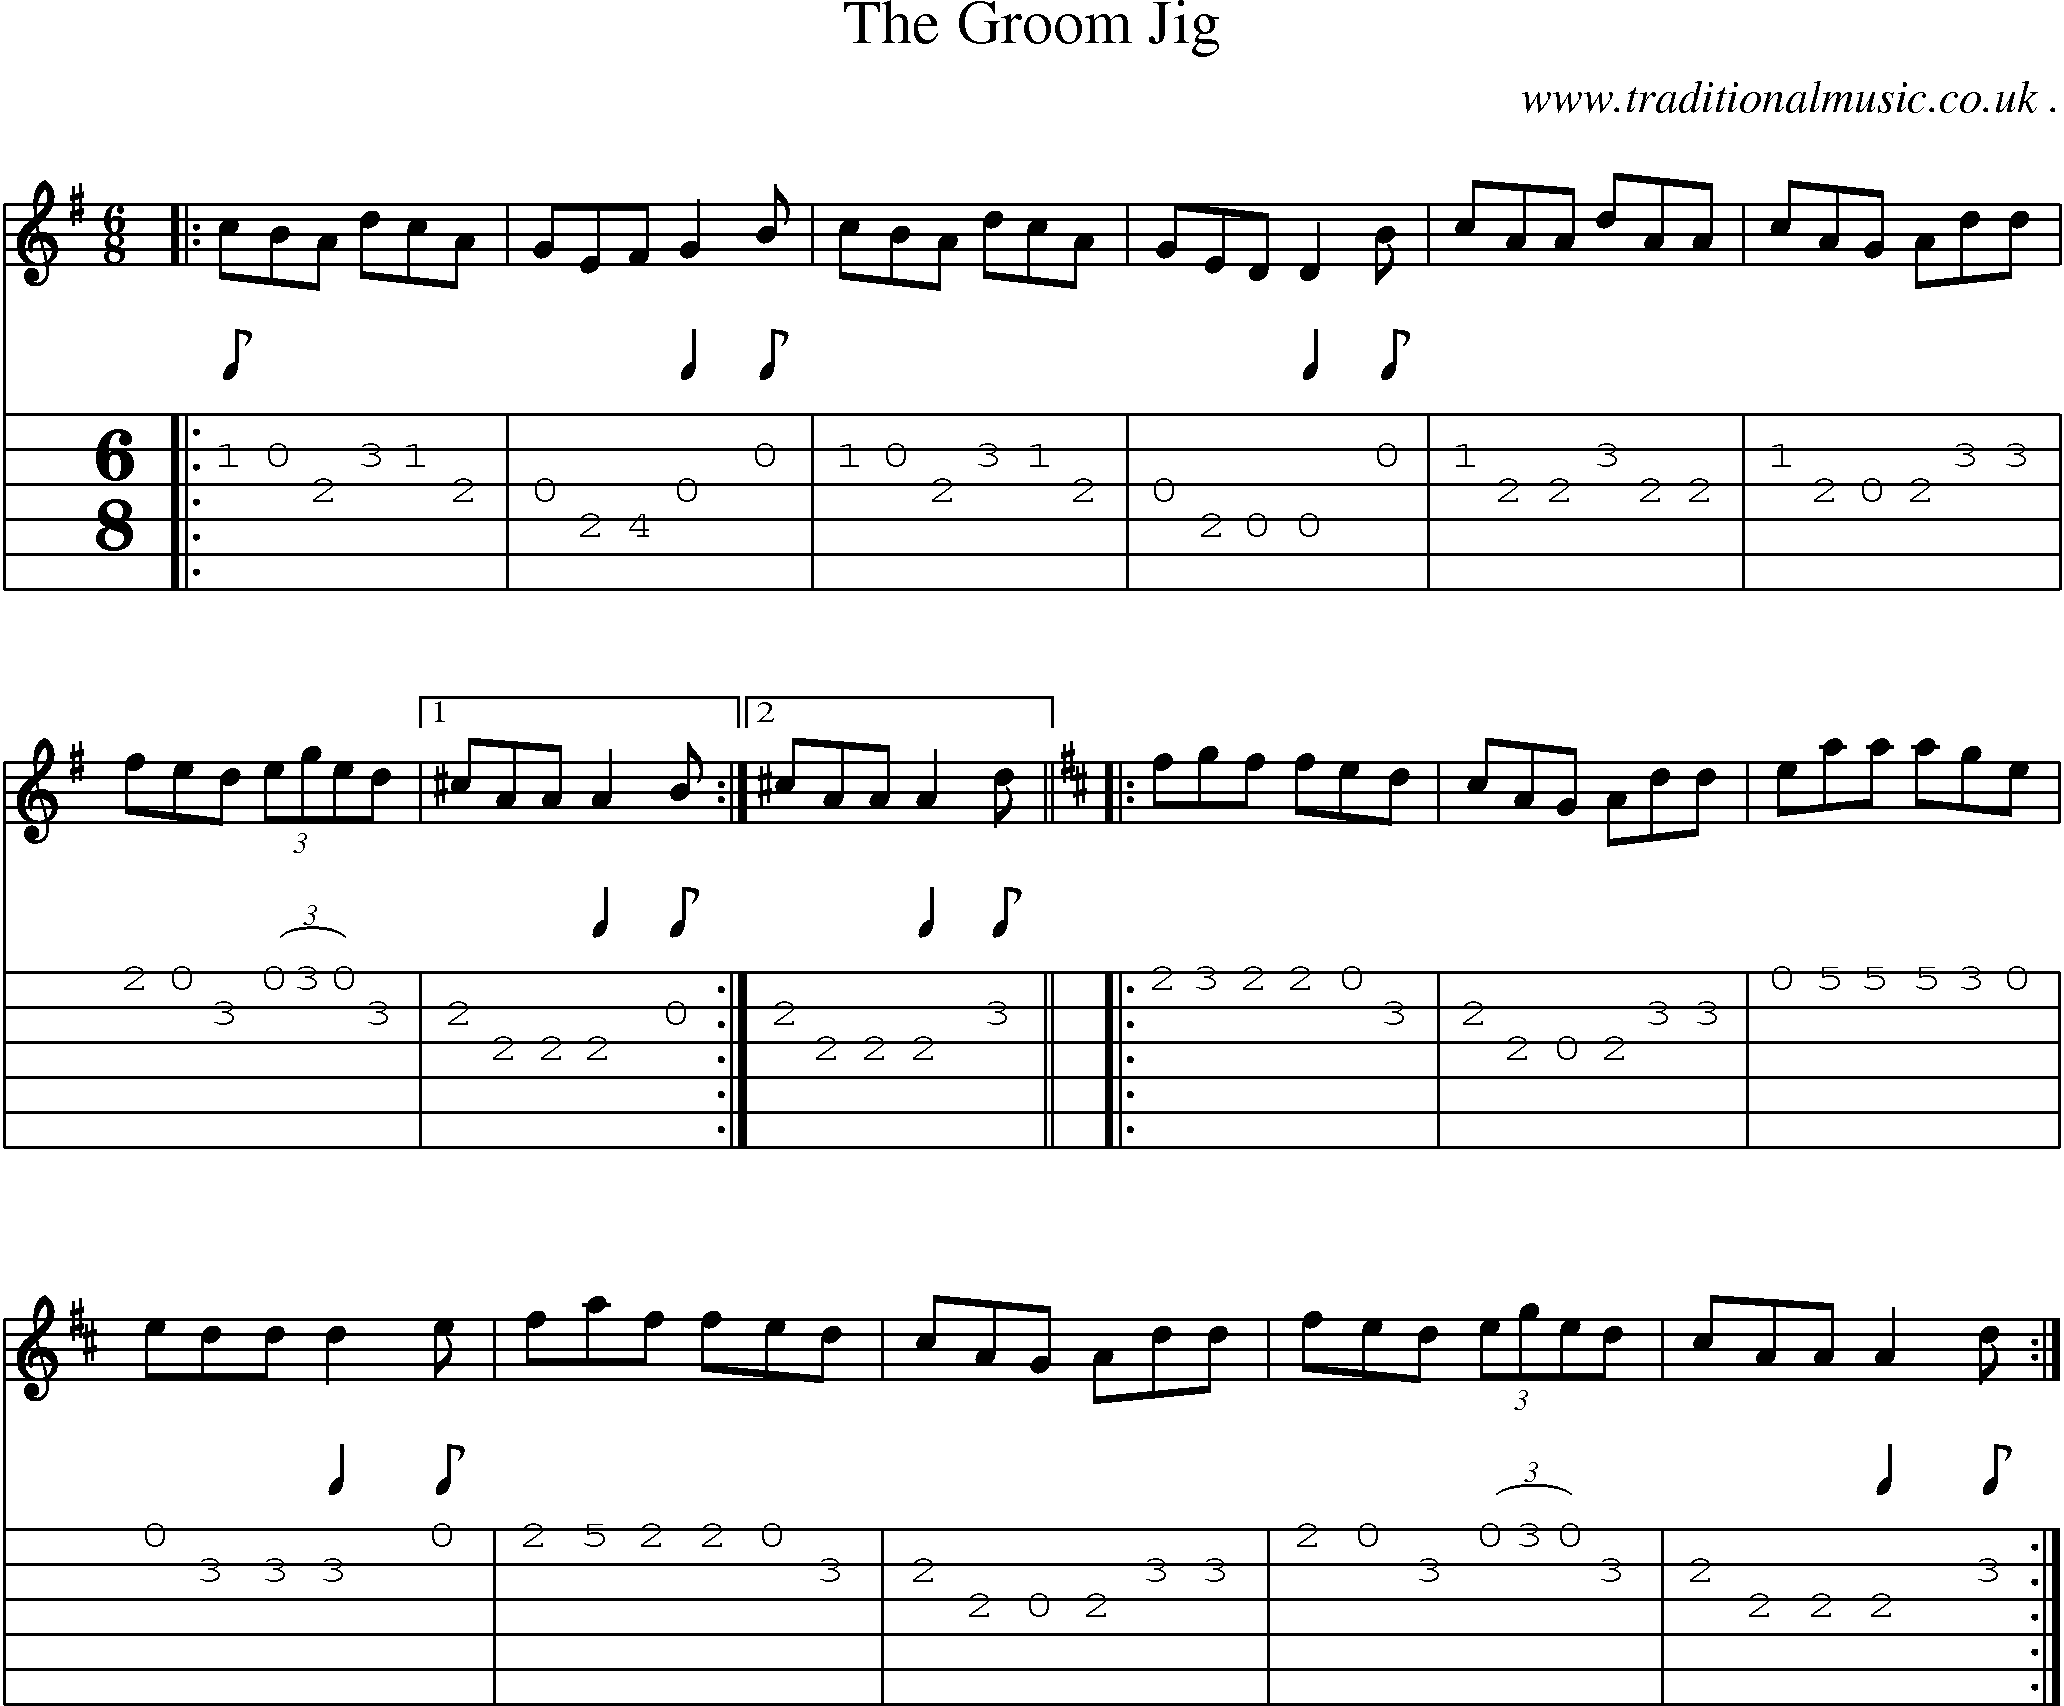 Sheet-Music and Guitar Tabs for The Groom Jig